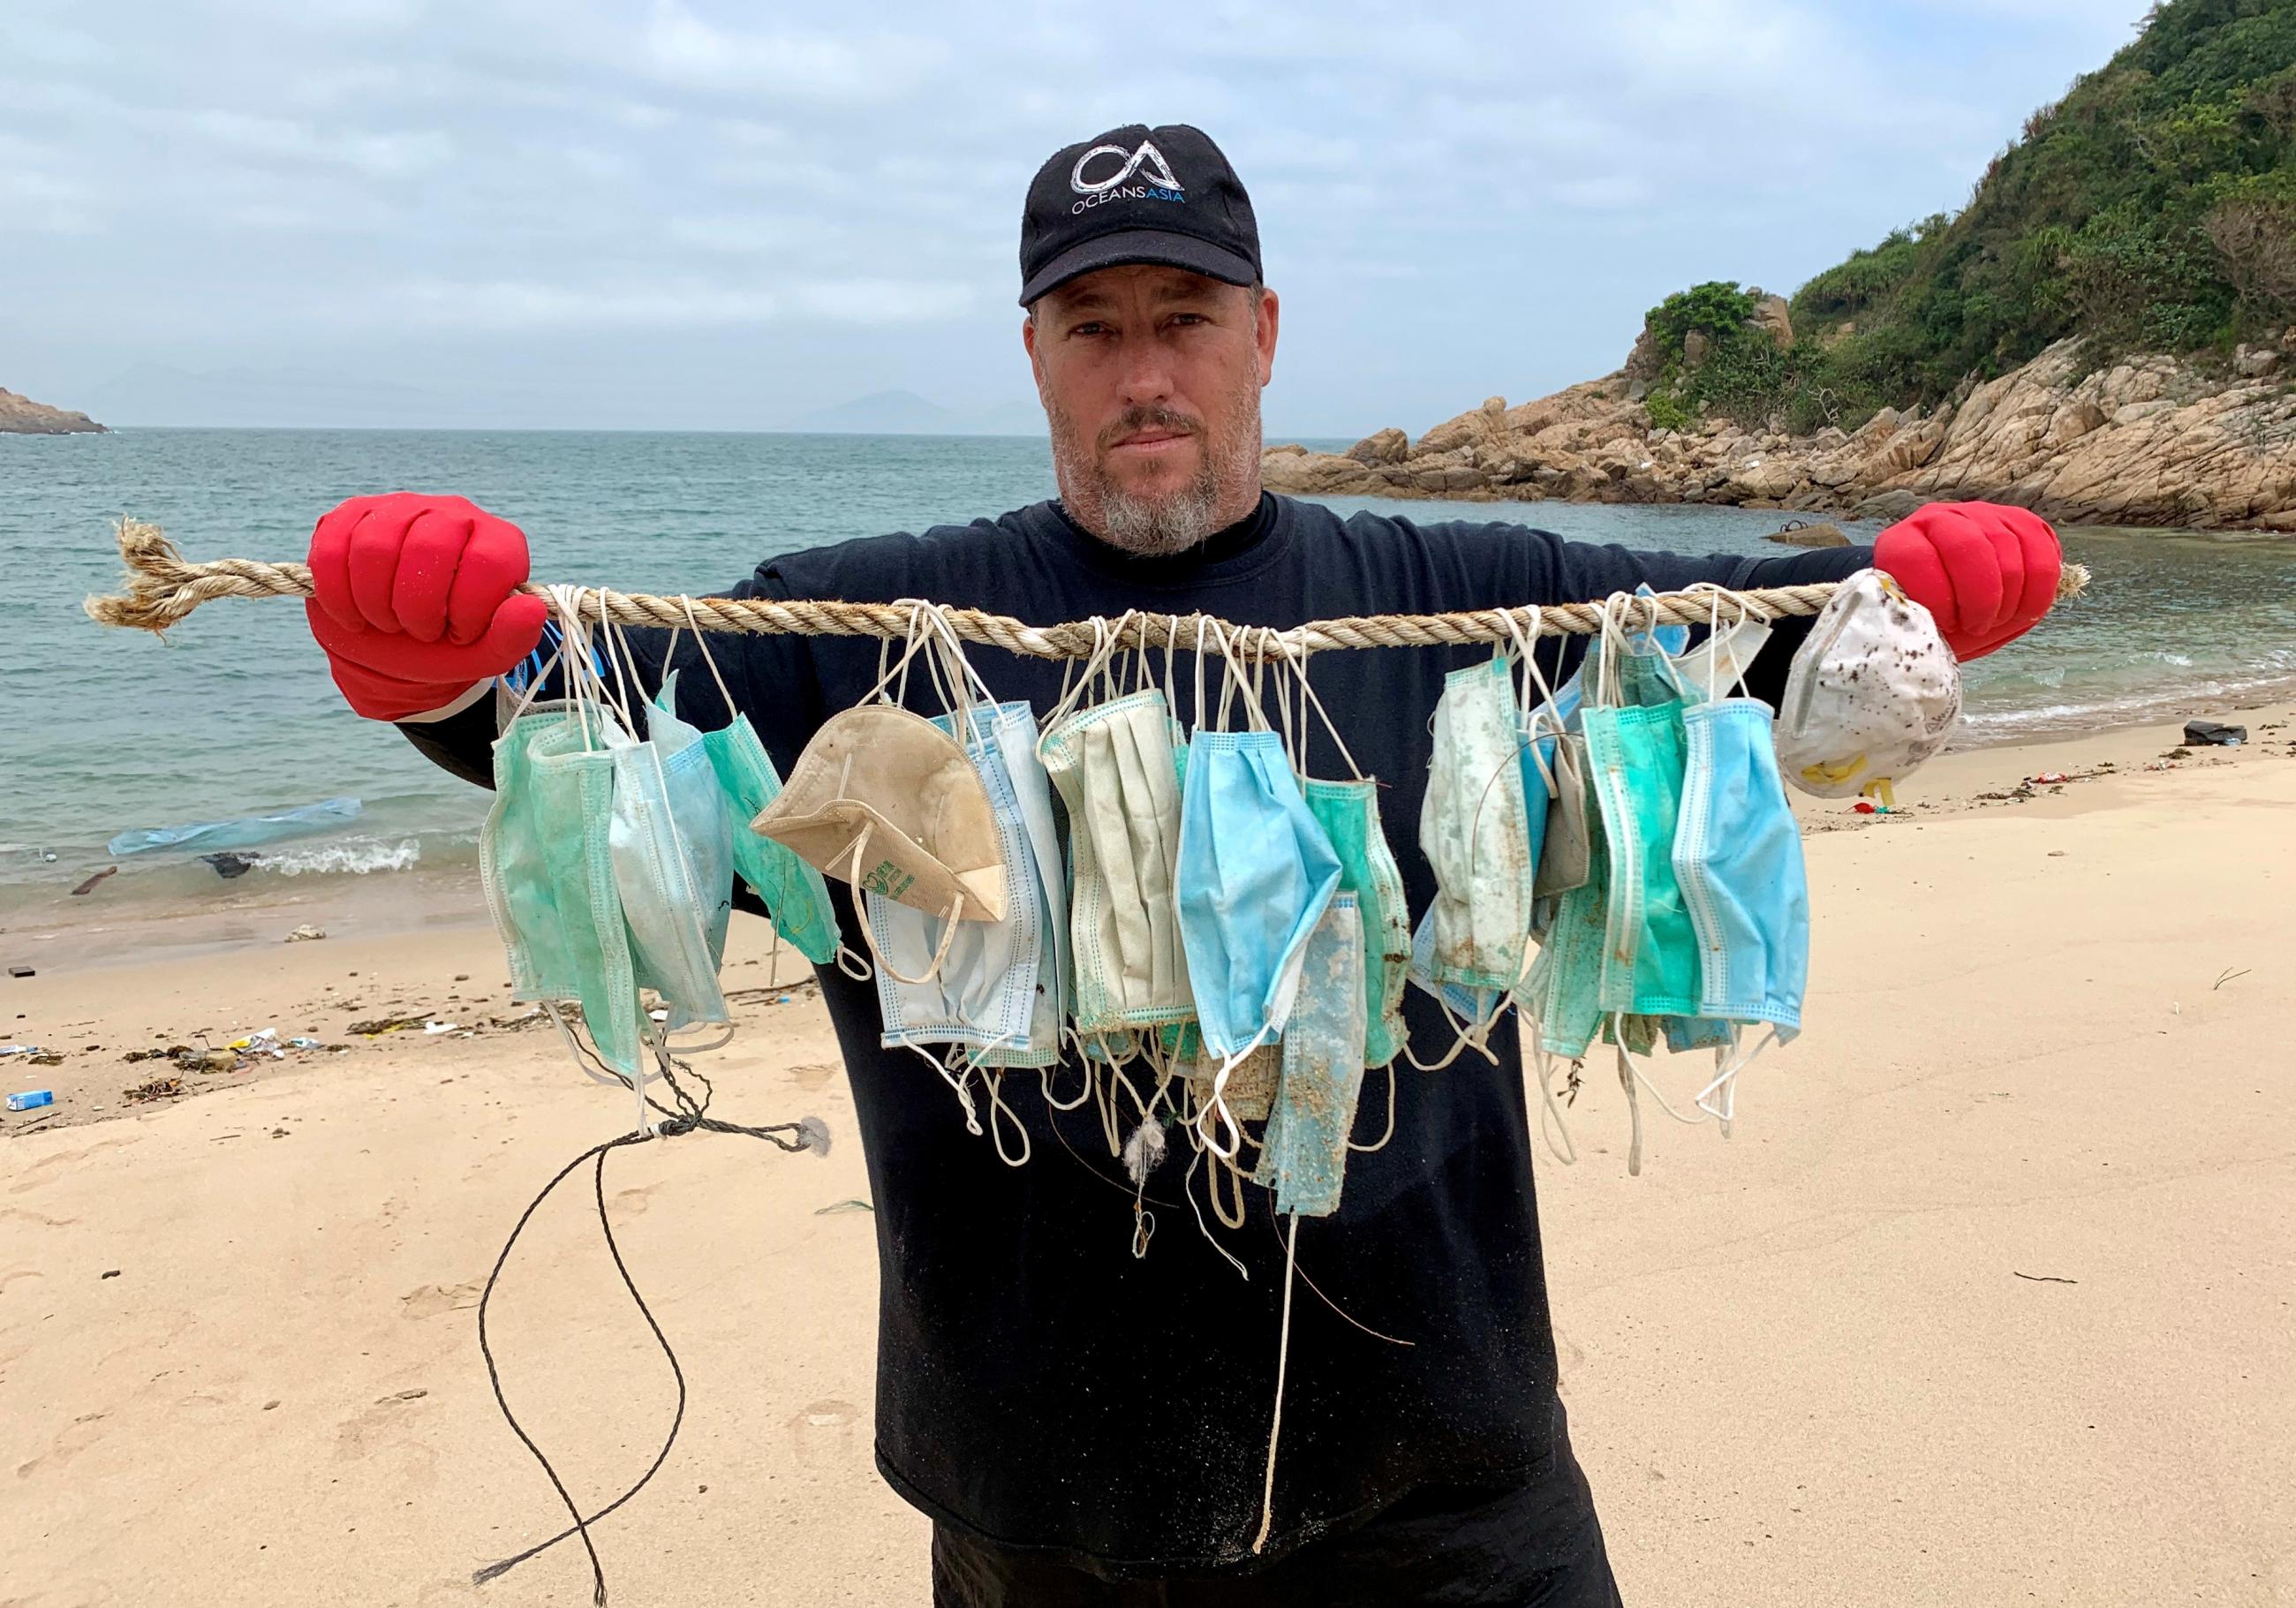 Gary Stokes, co-founder of marine conservation group OceansAsia, stands on a beach in the Soko Islands, holding green and blue medical masks that washed up following an outbreak of the novel coronavirus, in Hong Kong, China March 7, 2020. 